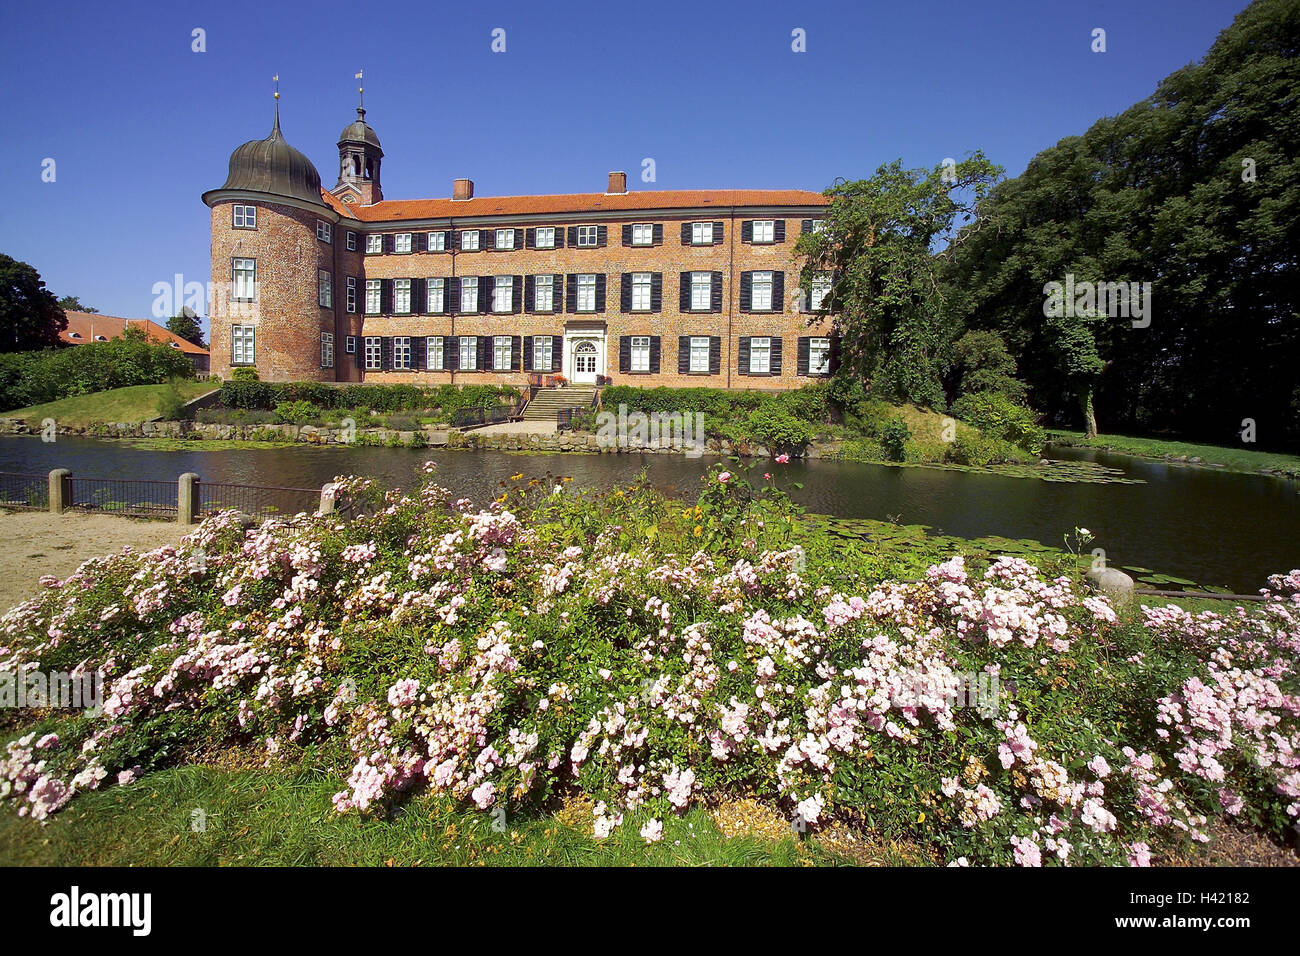 Germany, Schleswig - Holstein, Eutin, lock, lakeside, Europe, North Germany, Holstein broad Switzerland, place of interest, castle building, building, museum, architecture, structure, 4 wing plant, castle grounds, big Eutiner lake Stock Photo